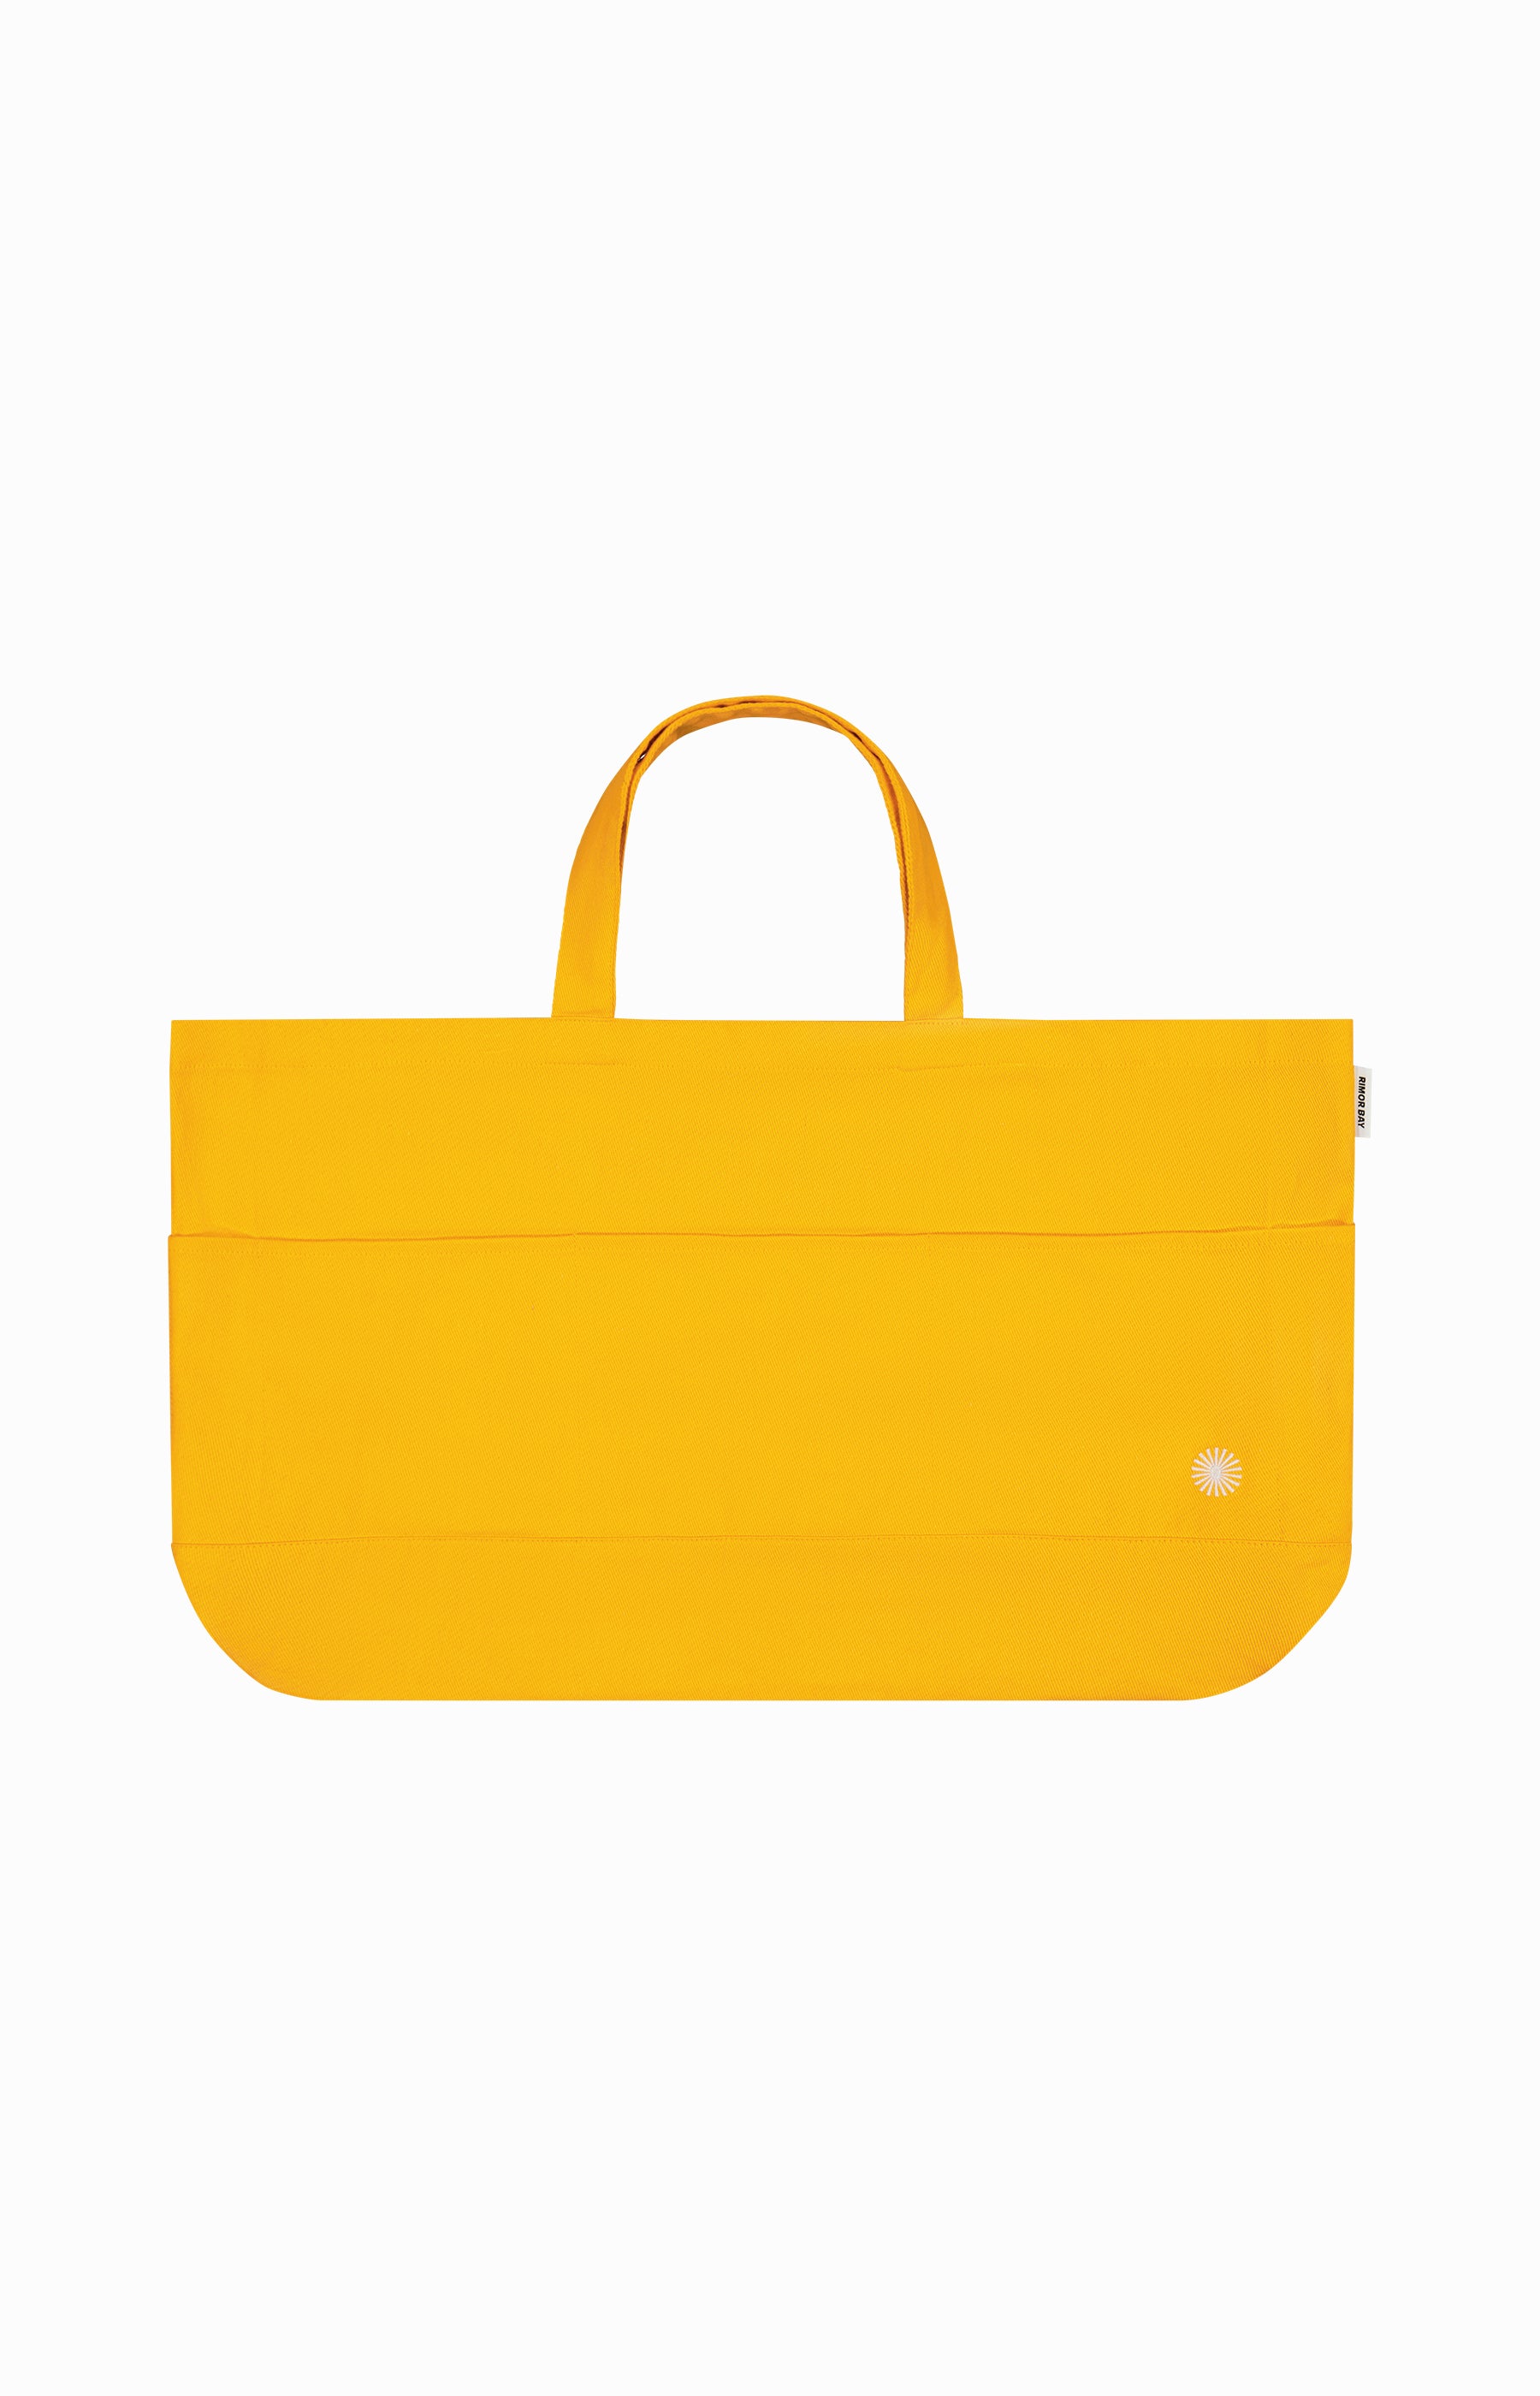 clear cut of yellow beach bag with handle and pockets